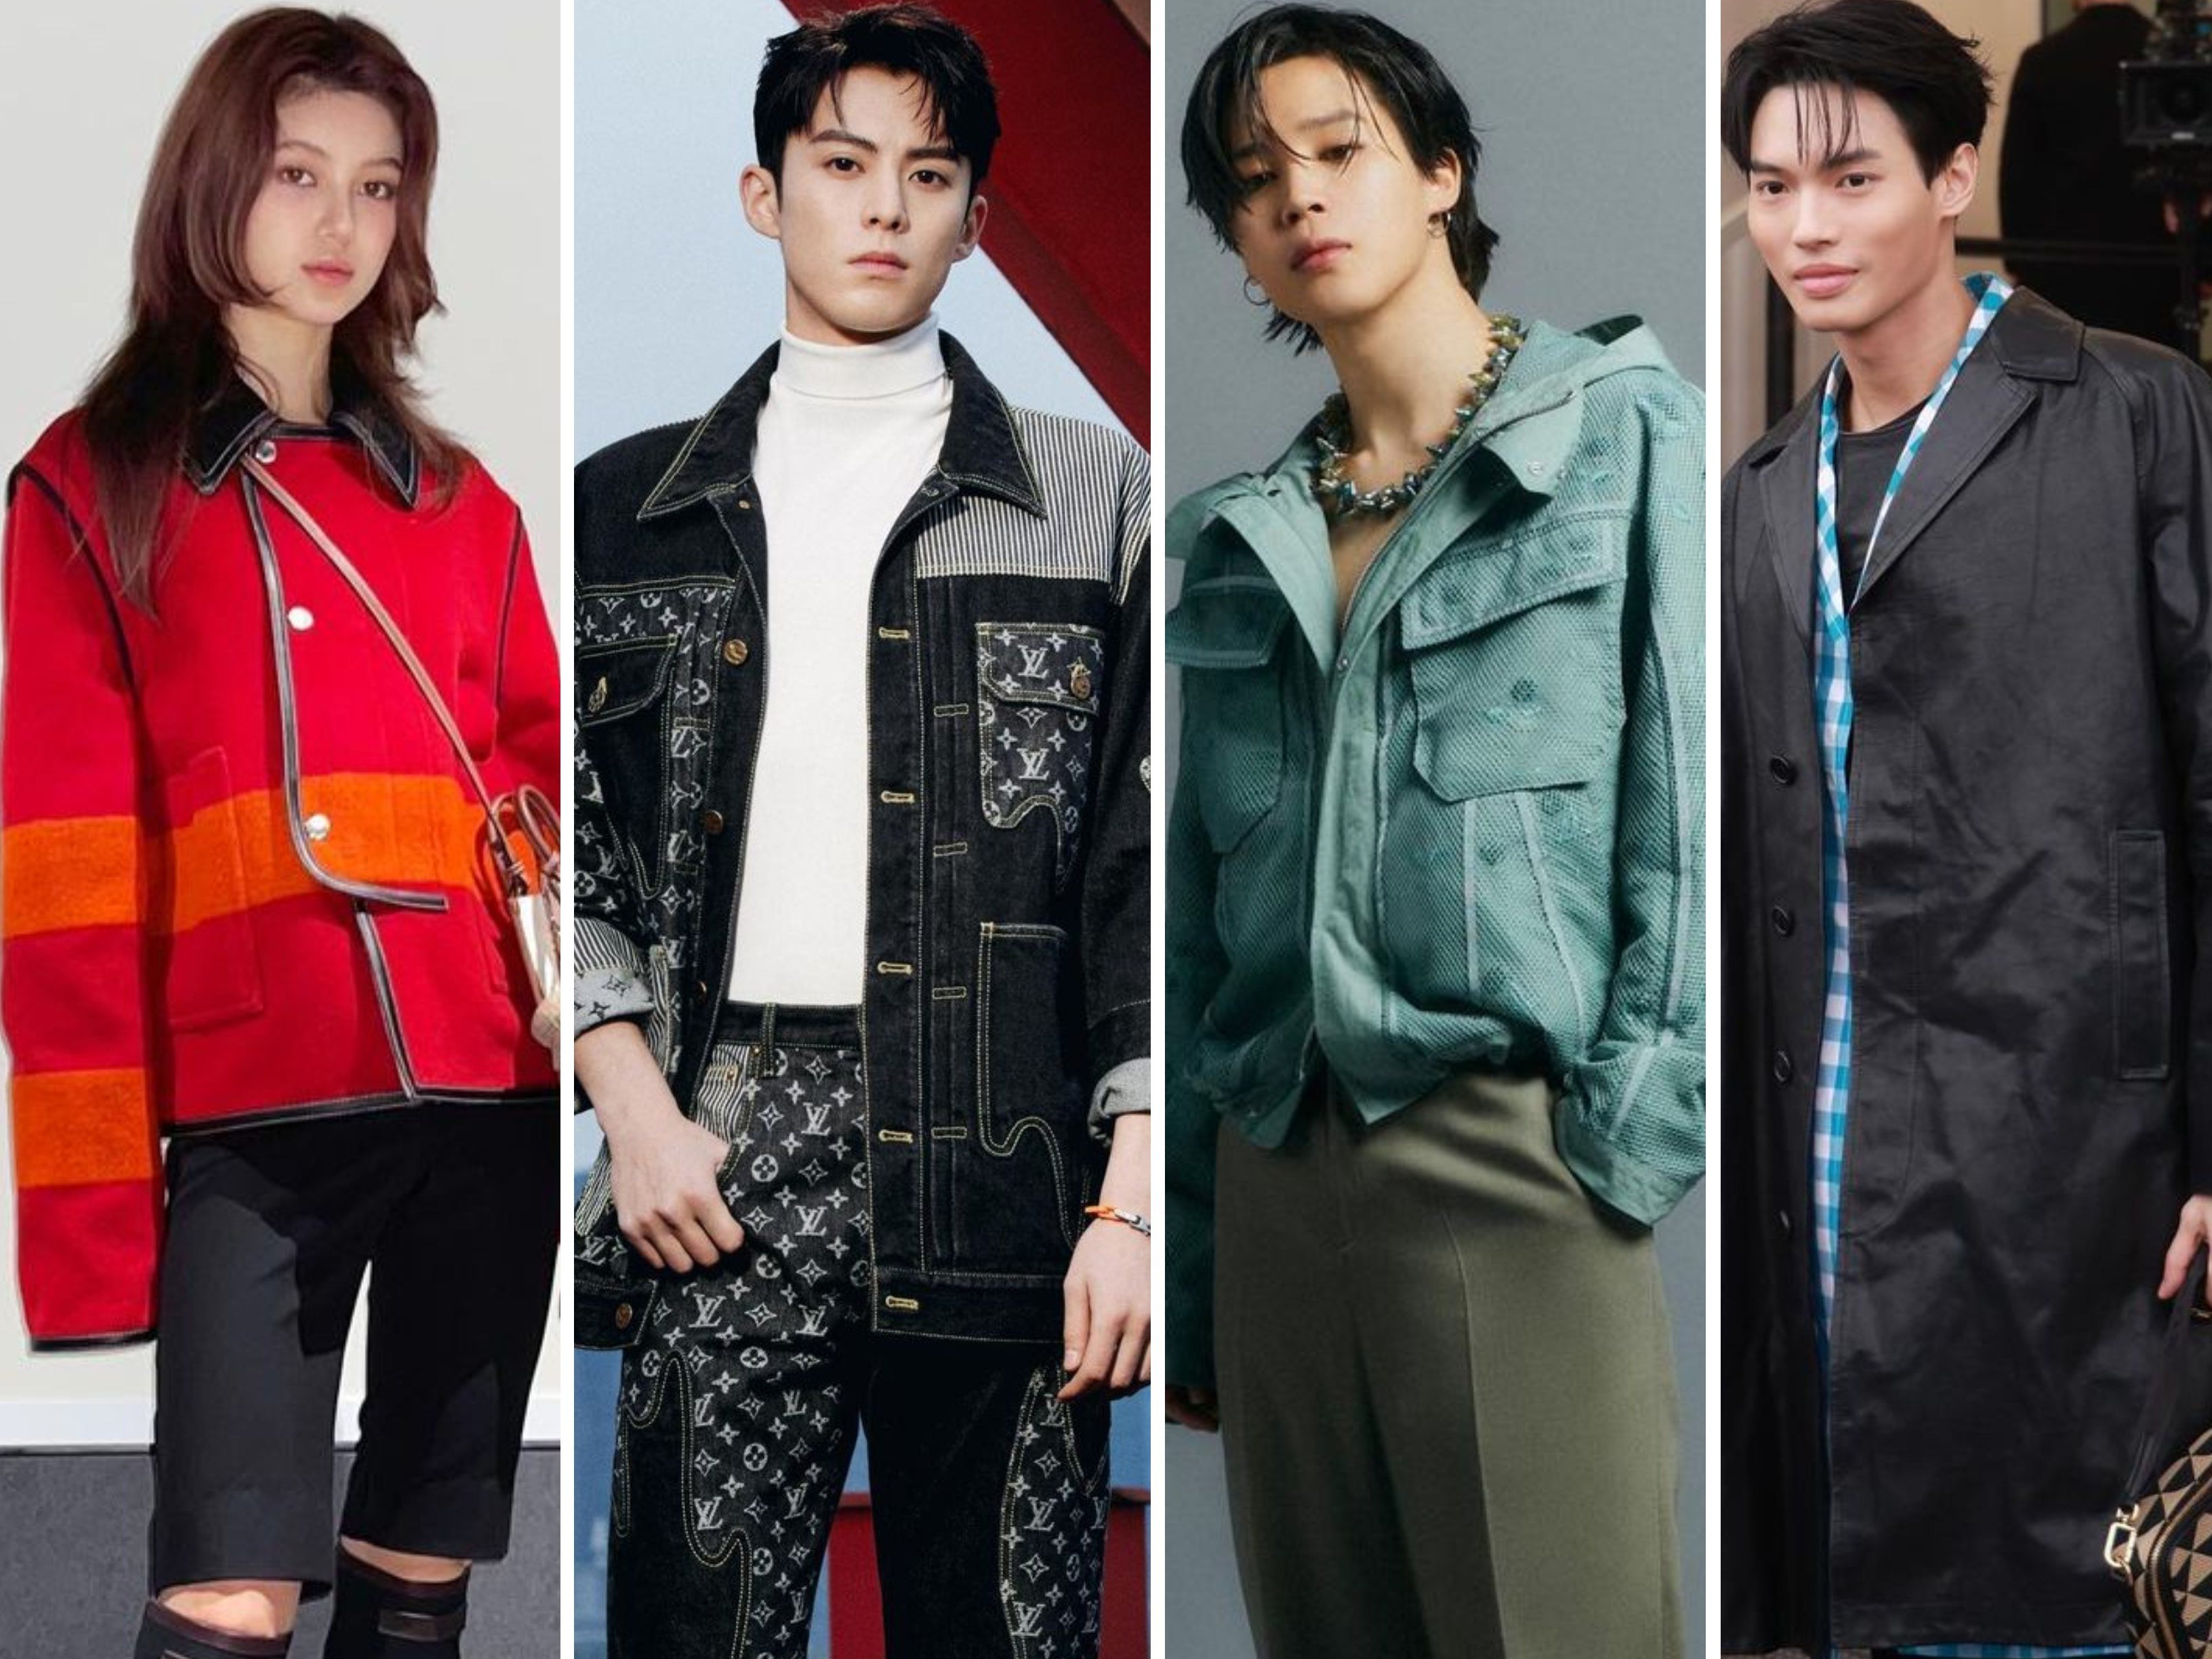 From NewJeans’ Danielle with Burberry and Dylan Wang with Louis Vuitton to BTS’ Jimin with Dior and Metawin “Win” Opas-iamkajorn with Prada, these Asian icons have just landed incredible luxury brand endorsements. Photos: @newjeans_official, @louisvuitton, @dior, @winmetawin/Instagram